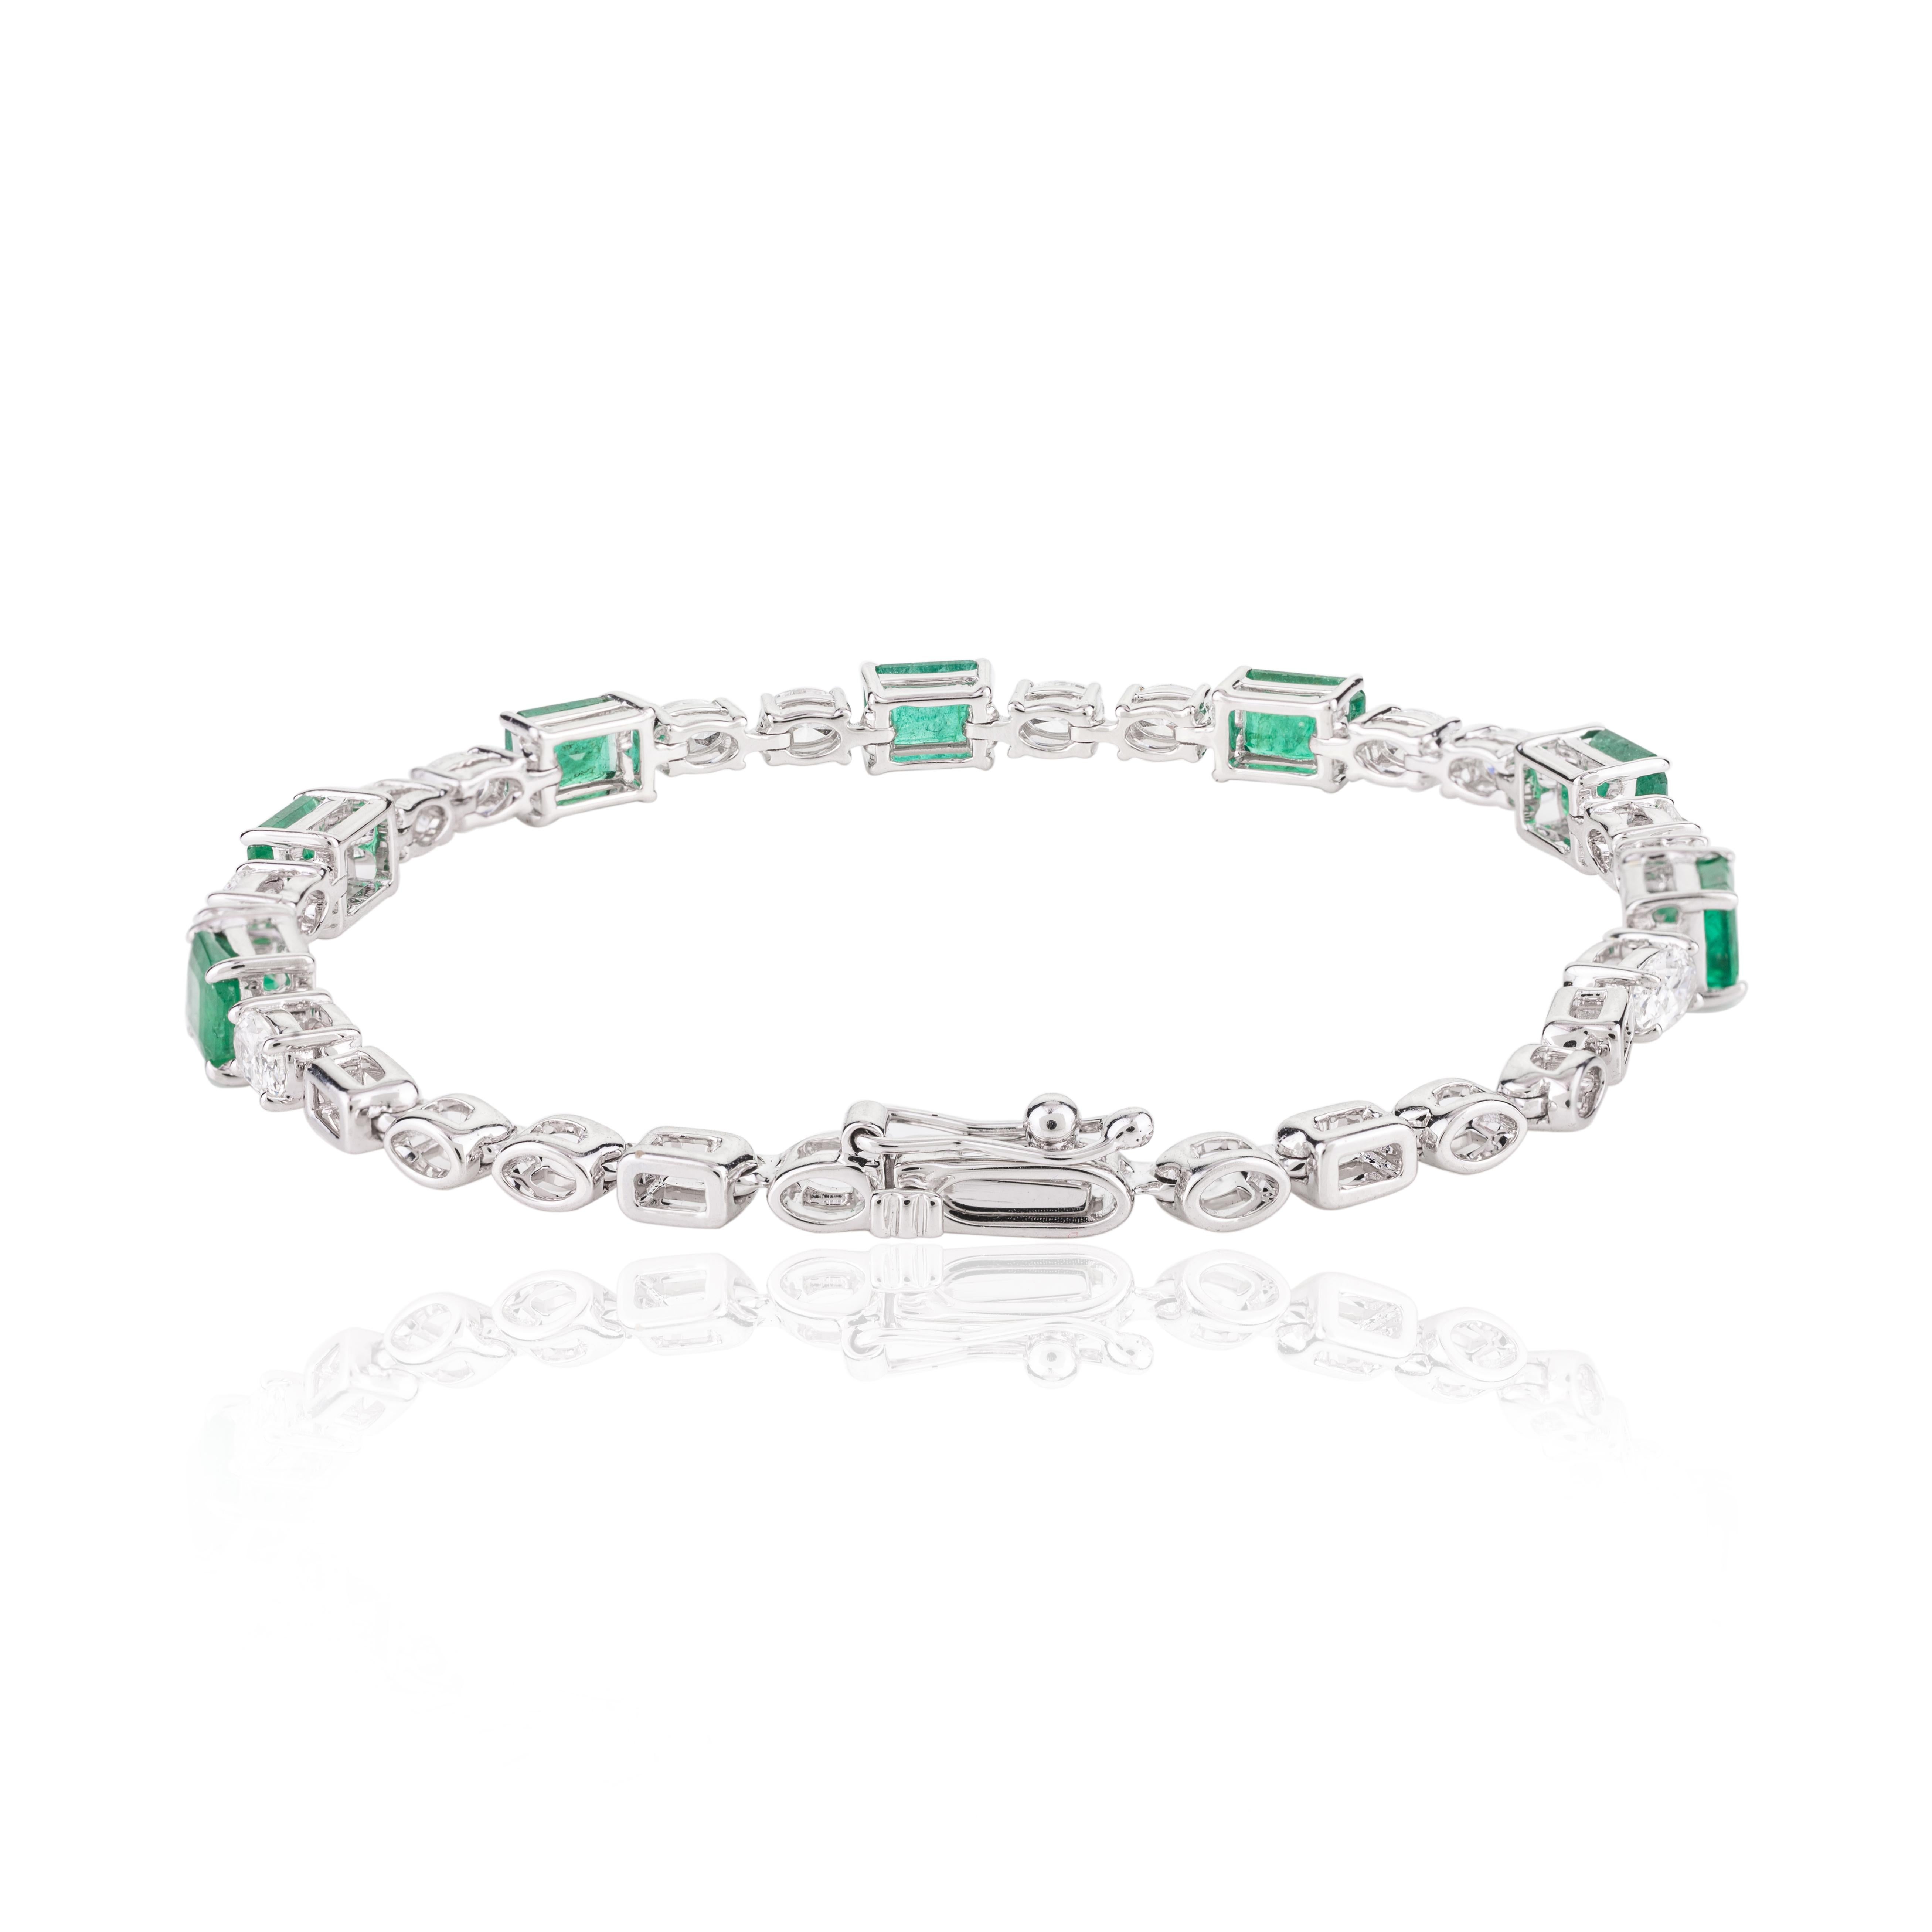 4.11 CTW Emerald and 2.24 CTW Diamond Tennis Bracelet in 18K White Gold In New Condition For Sale In Houston, TX